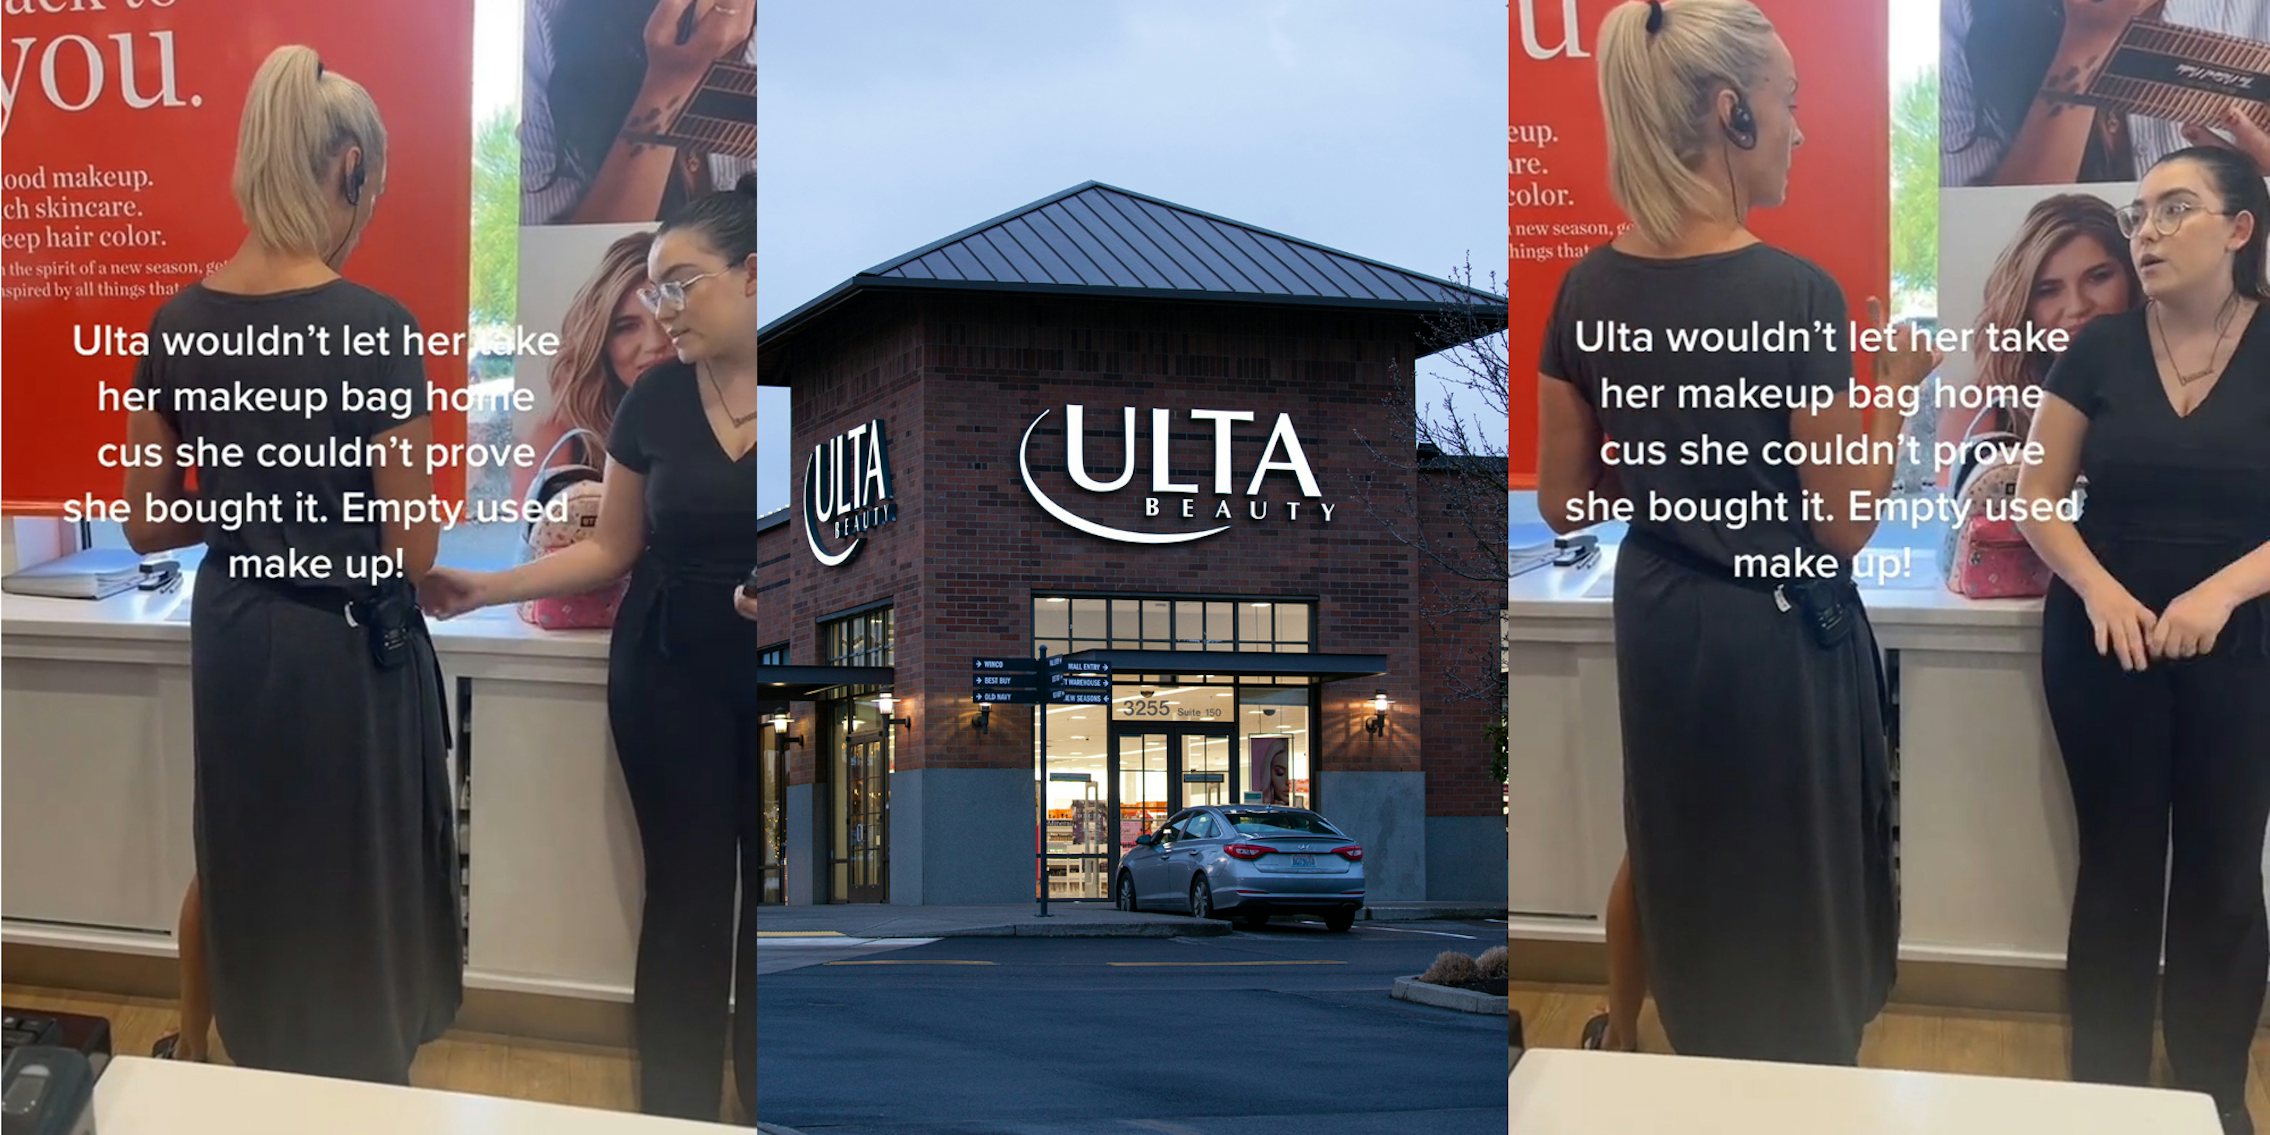 Ulta manager and worker behind counter speaking caption 'Ulta wouldn't let her take her makeup bag home cus she couldn't prove she bought it. Empty used makeup!' (l) Ulta building and sign (c) Ulta manager and worker behind counter speaking caption 'Ulta wouldn't let her take her makeup bag home cus she couldn't prove she bought it. Empty used makeup!' (r)